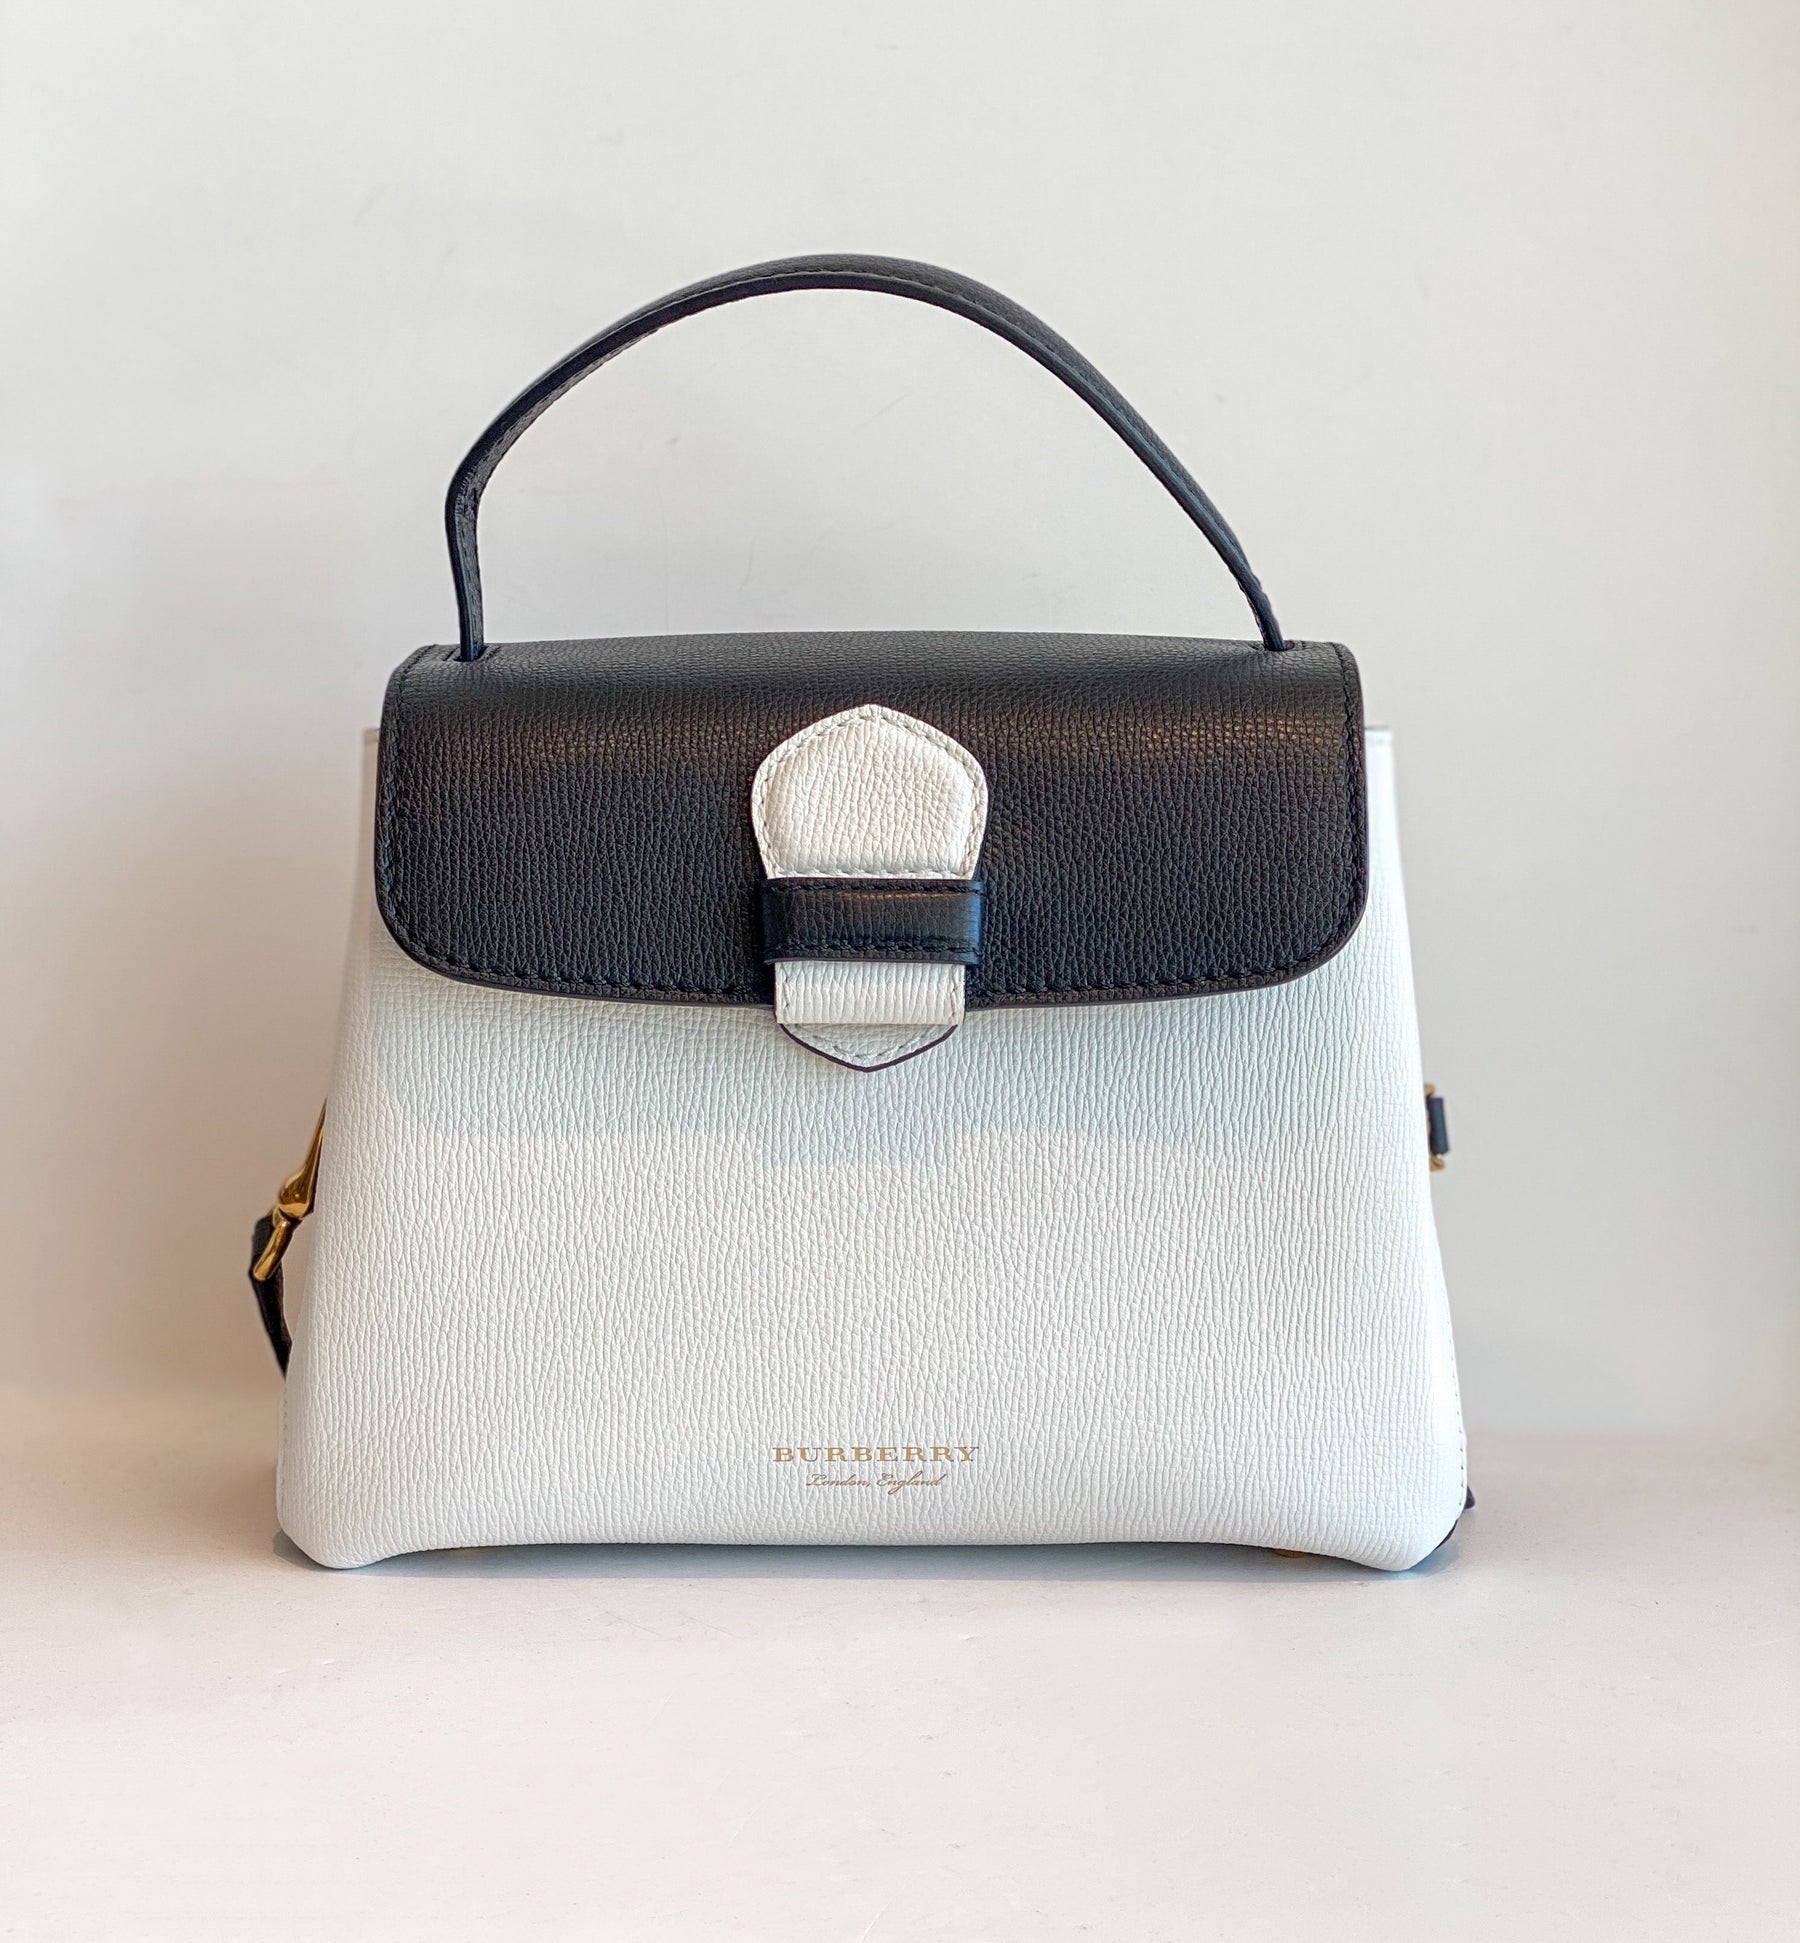 Burberry Camberley Bag Black and White Front of Bag